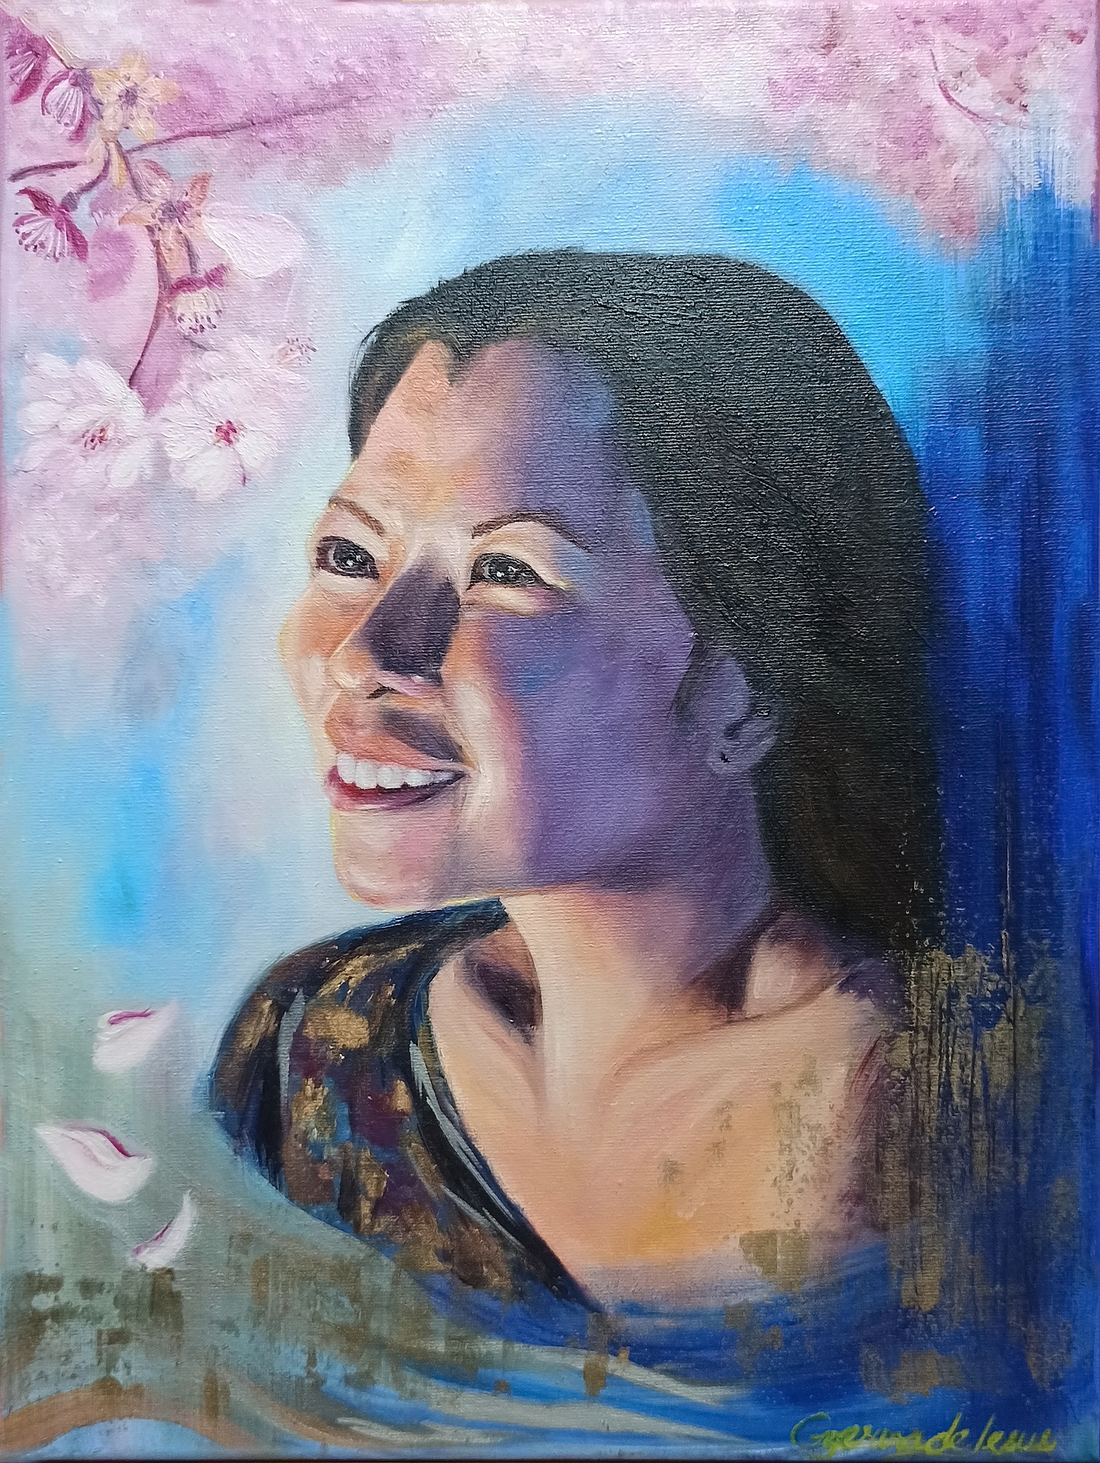 Capturing Inner Beauty Through Oil Painting: A Timeless Tribute to Friend